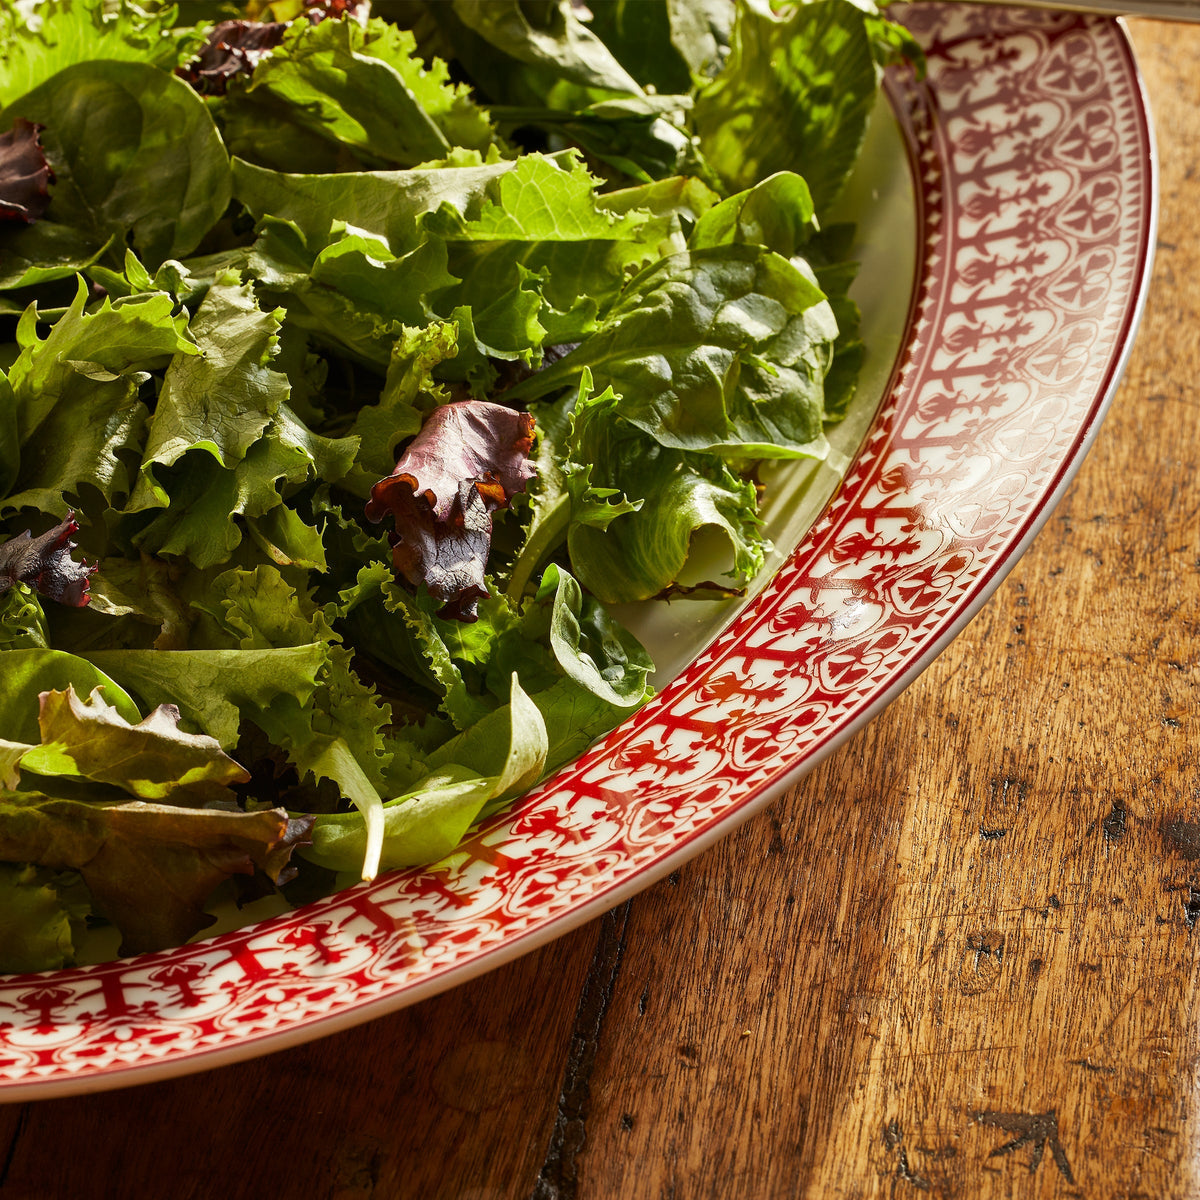 A Caskata Artisanal Home Casablanca Crimson Oval Rimmed Platter holds a serving of mixed green leafy salad, placed on a wooden surface.